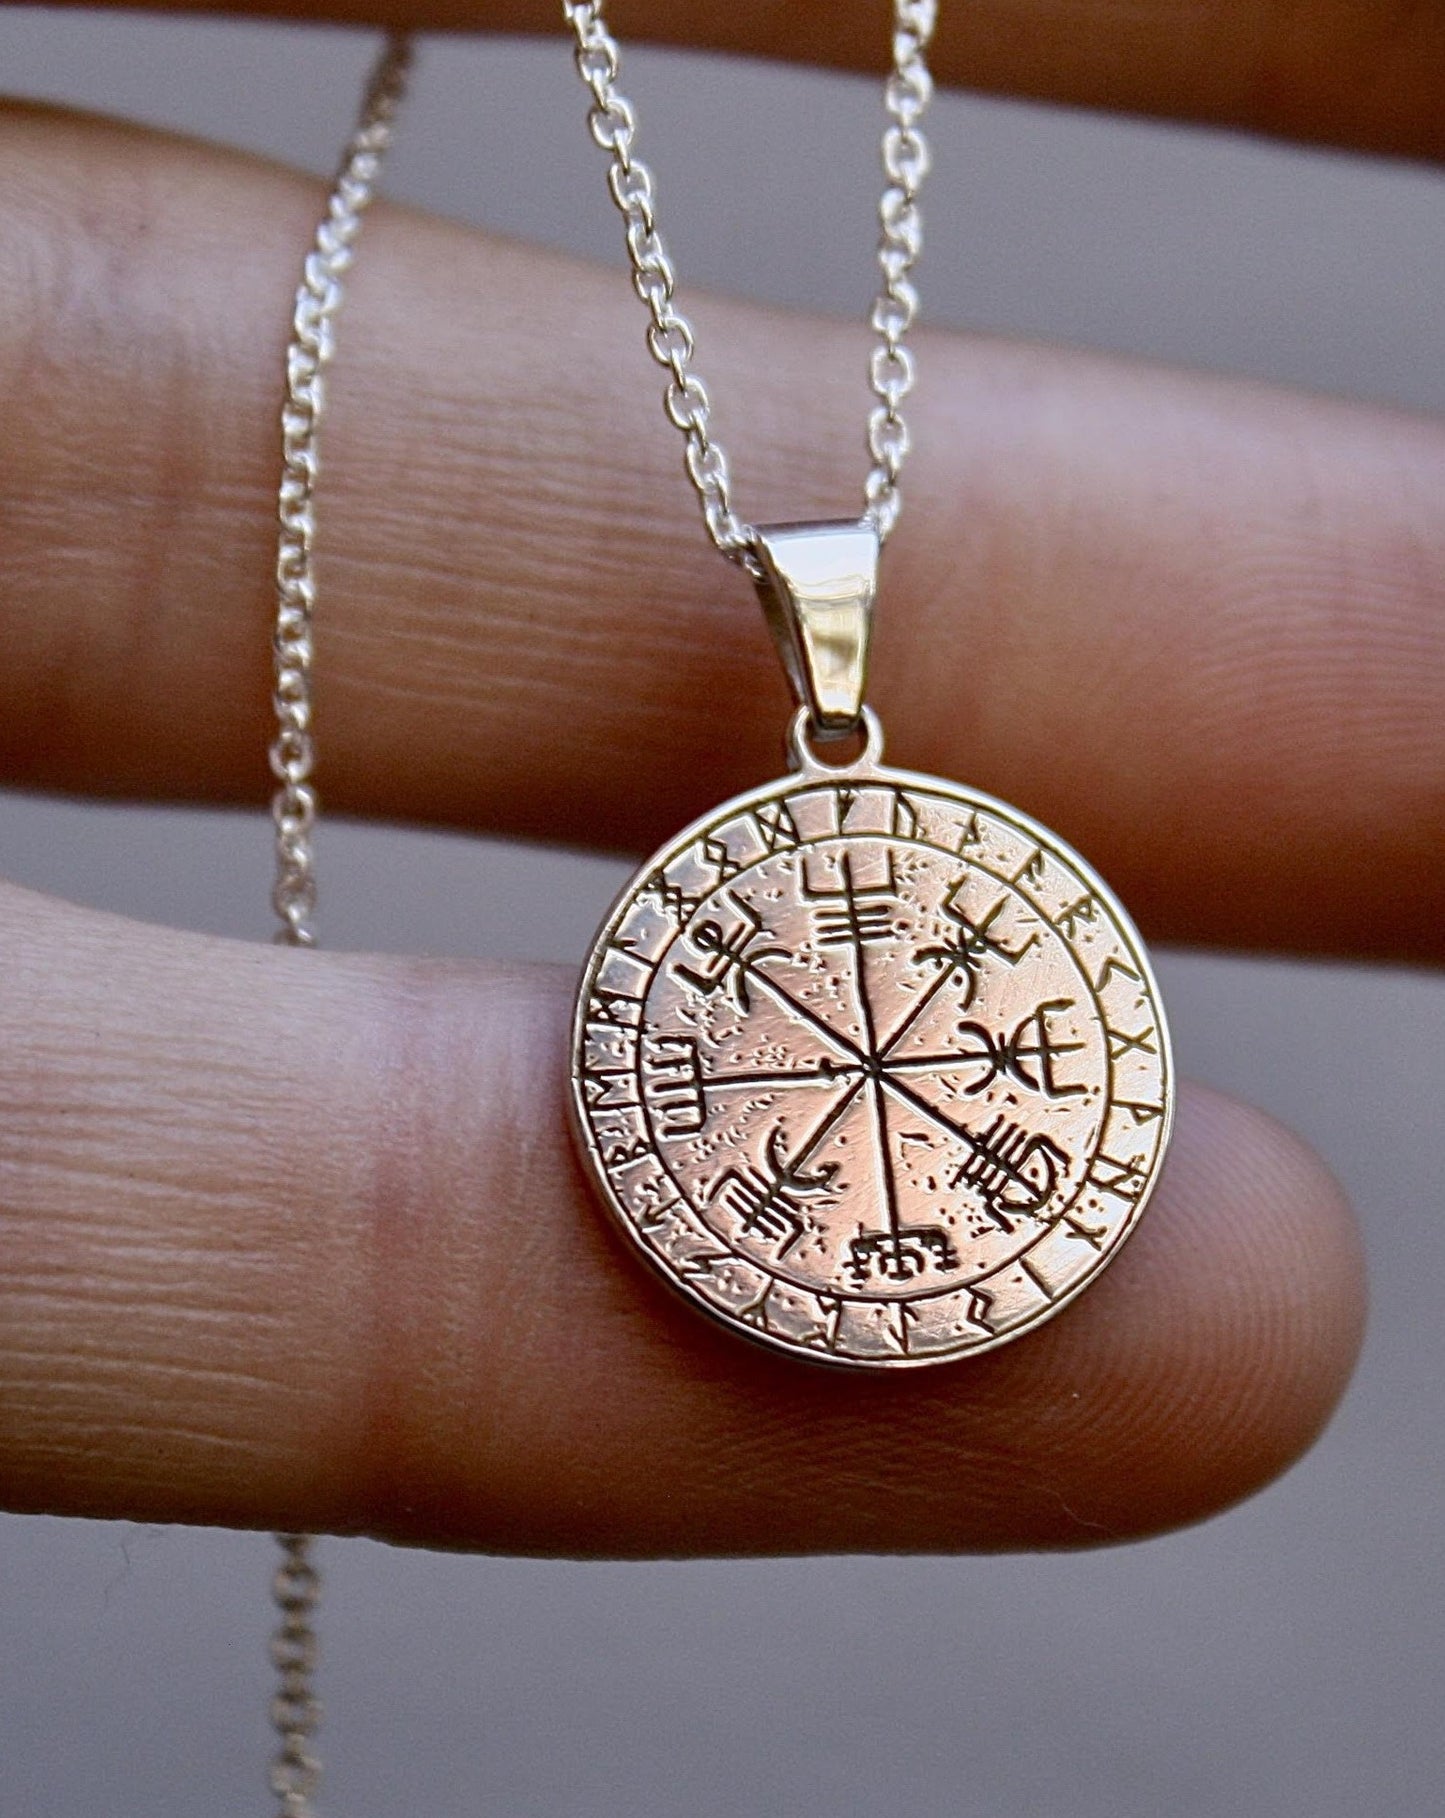 Nordic Compass Necklace by Jade Rabbit Jewellery. Shown close up in hand.